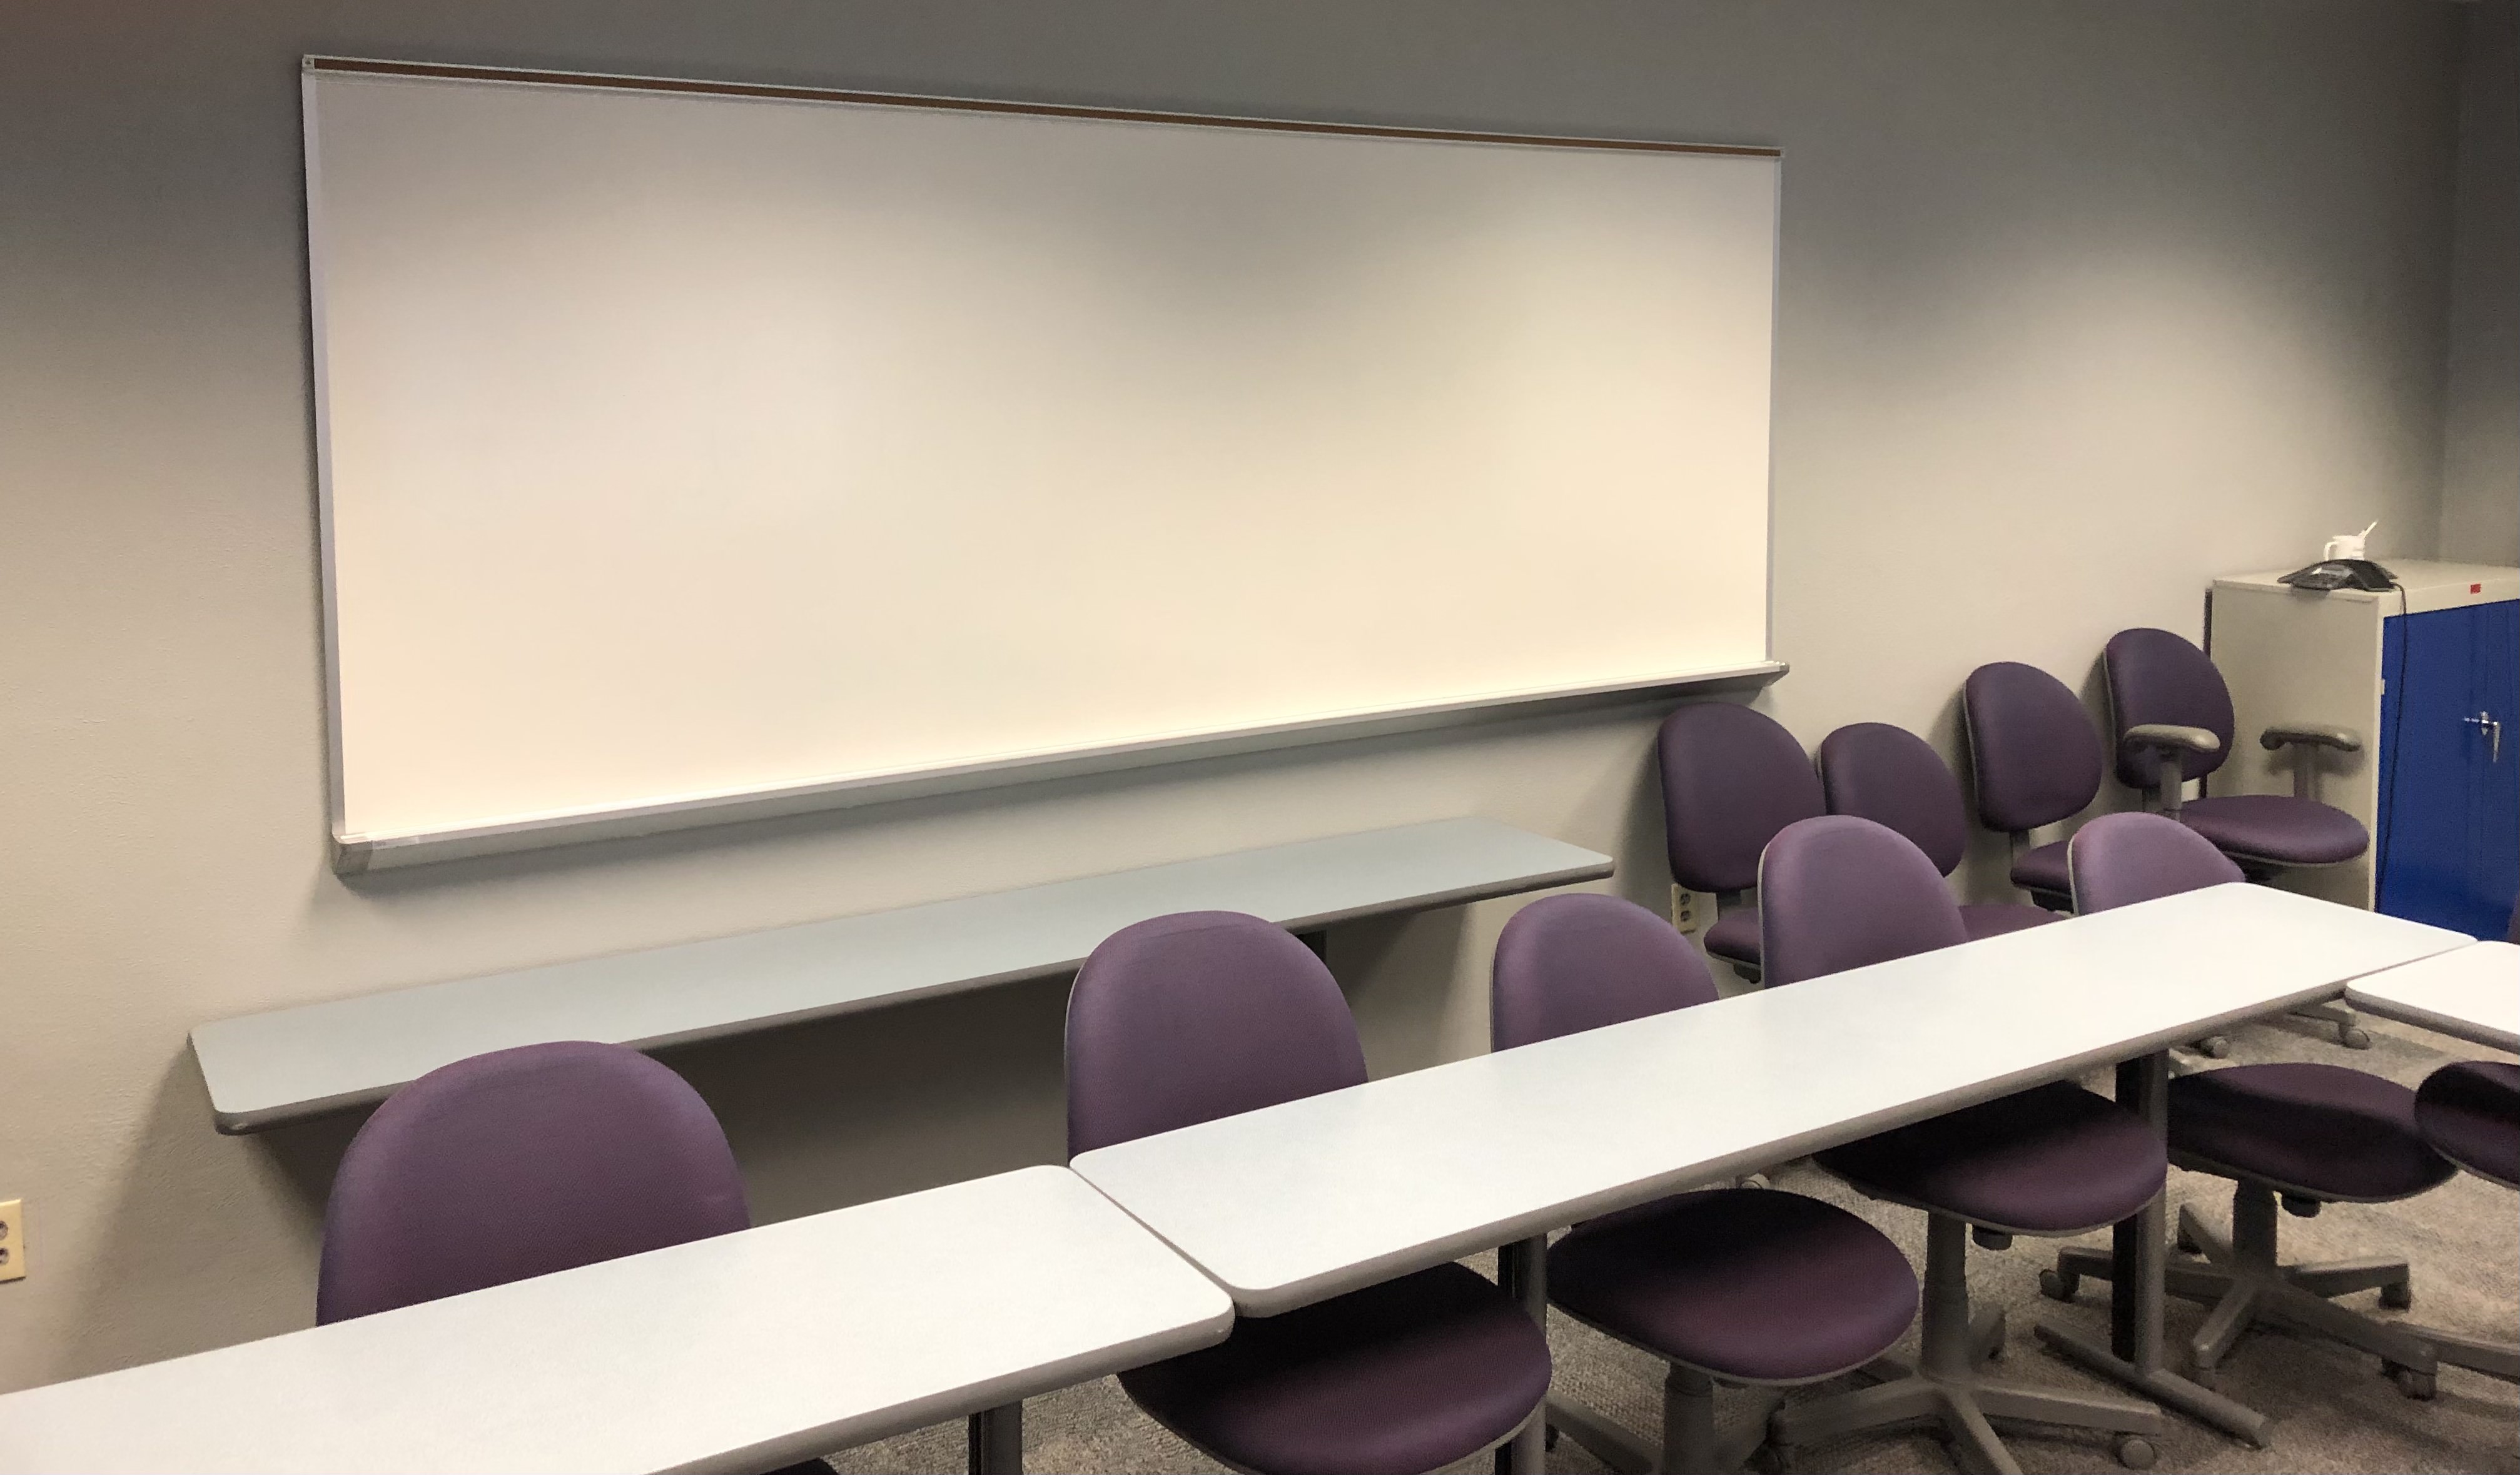 Student seating with a white board on the wall